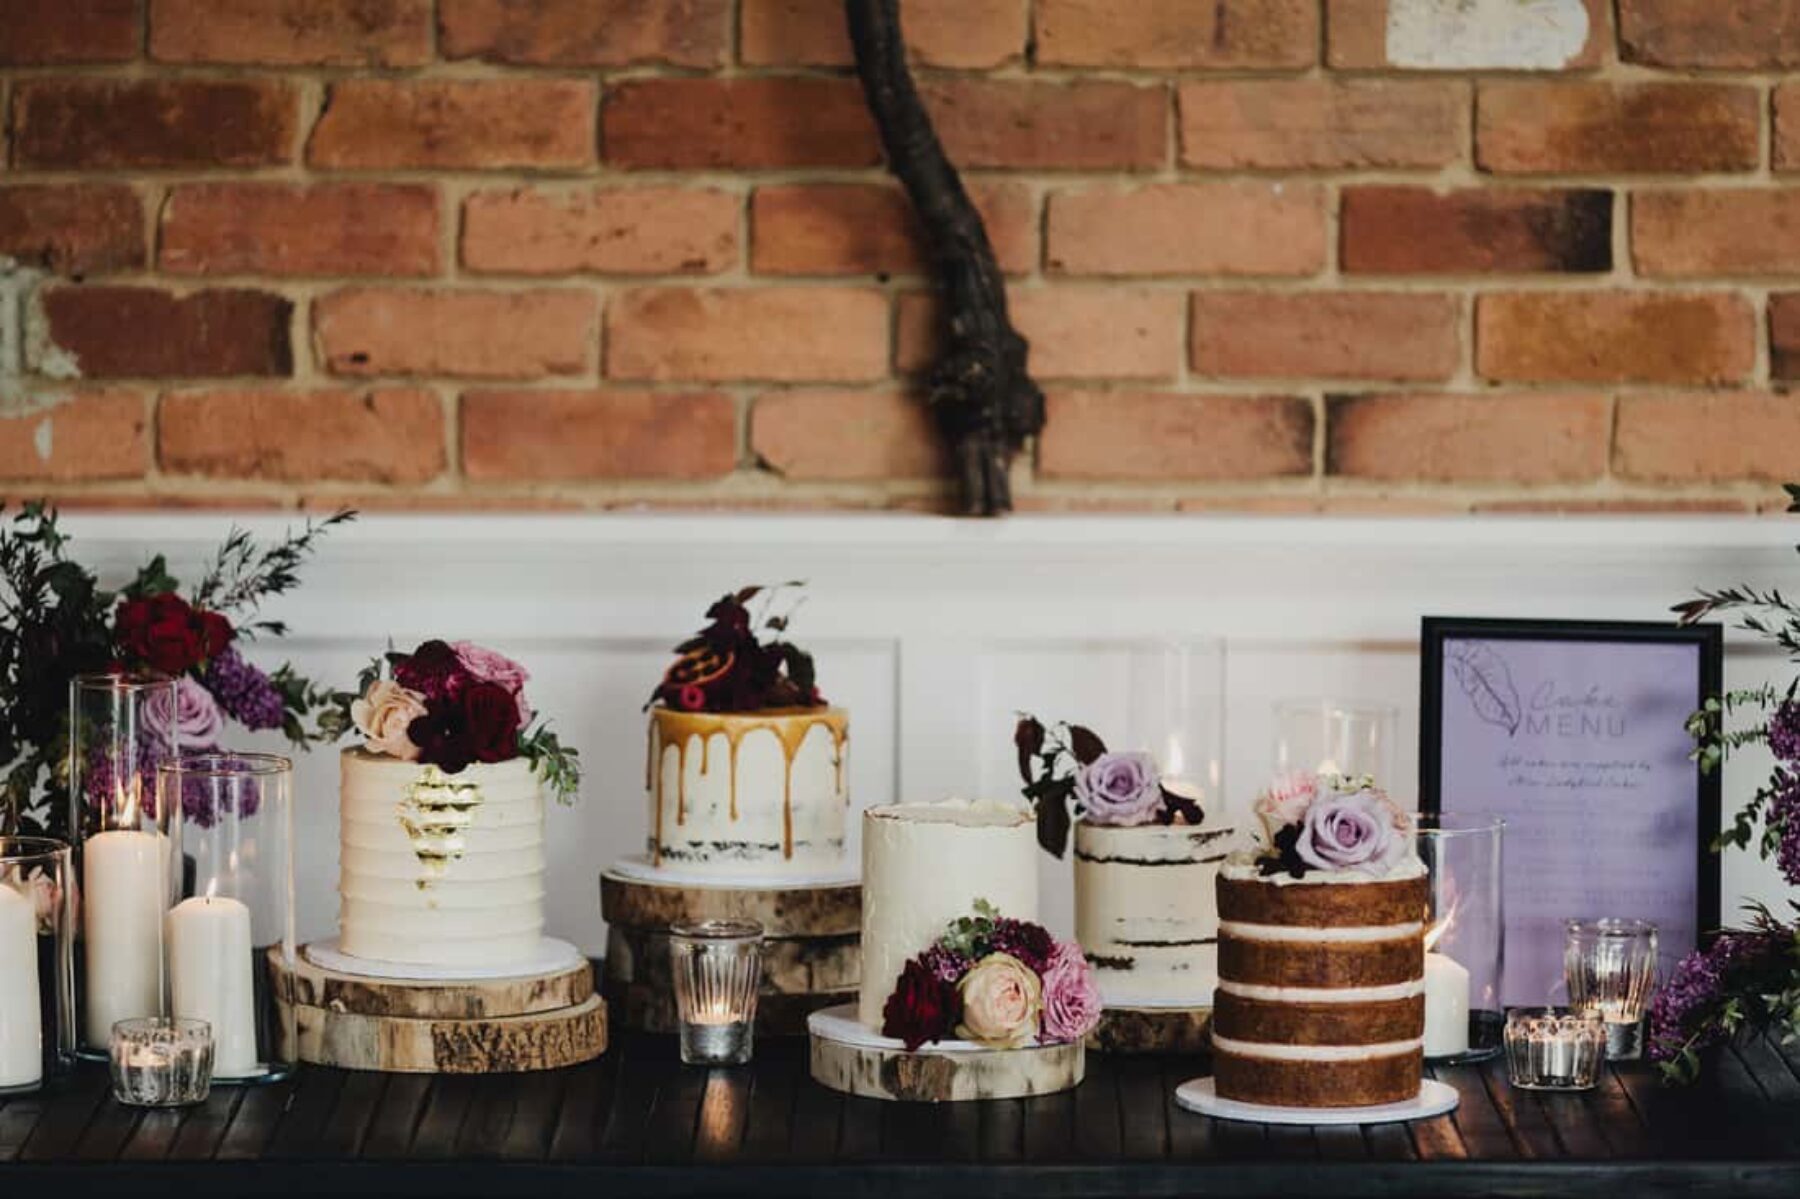 gorgeous cake display for a stylish hen's day